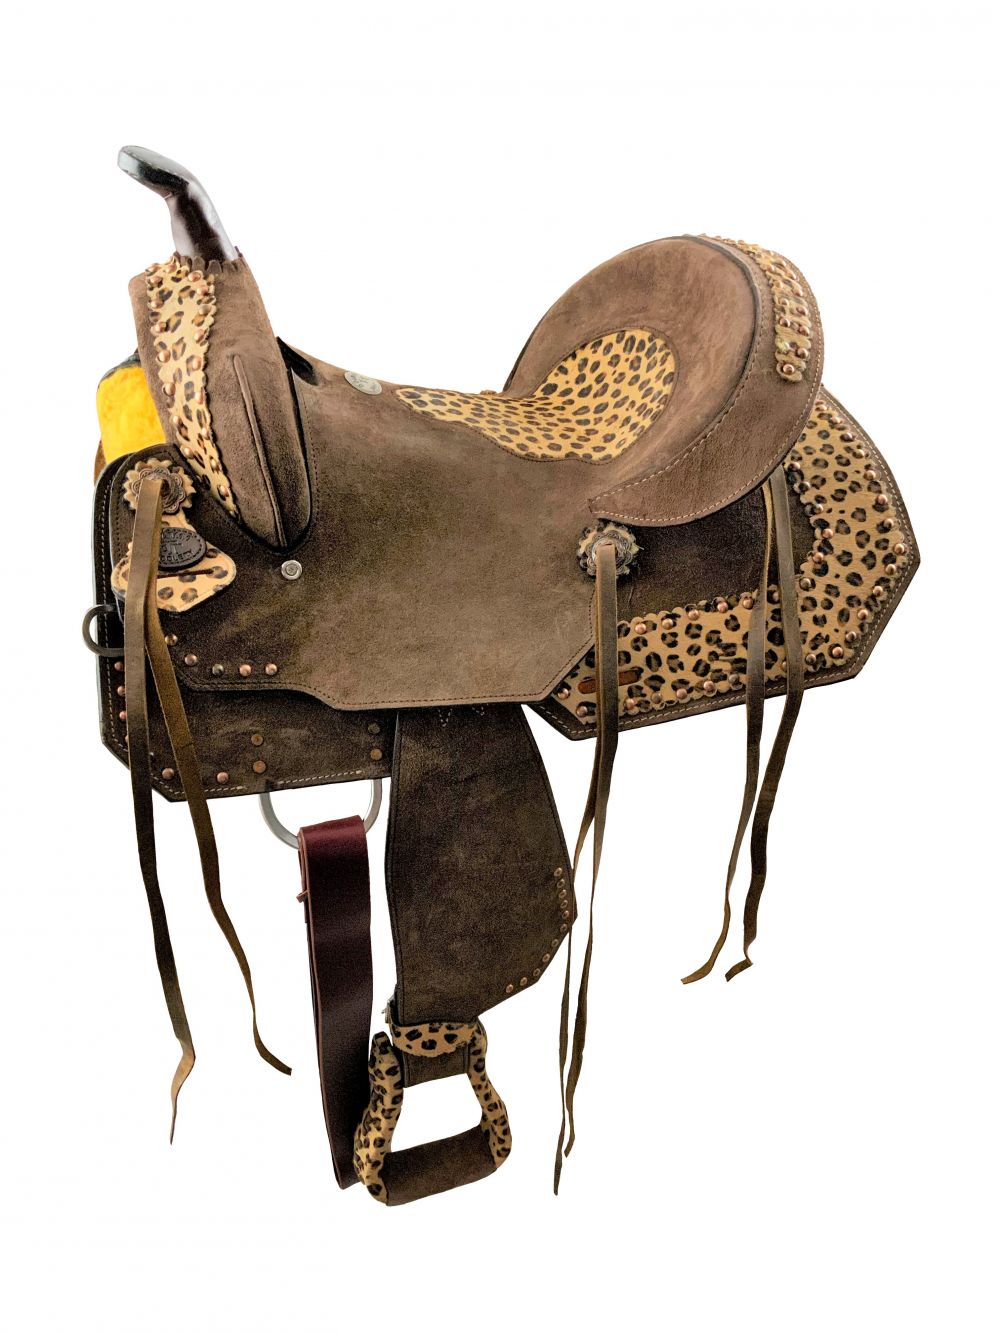 14", 15", 16" Double T Hard Seat Barrel style saddle with Cheetah Seat